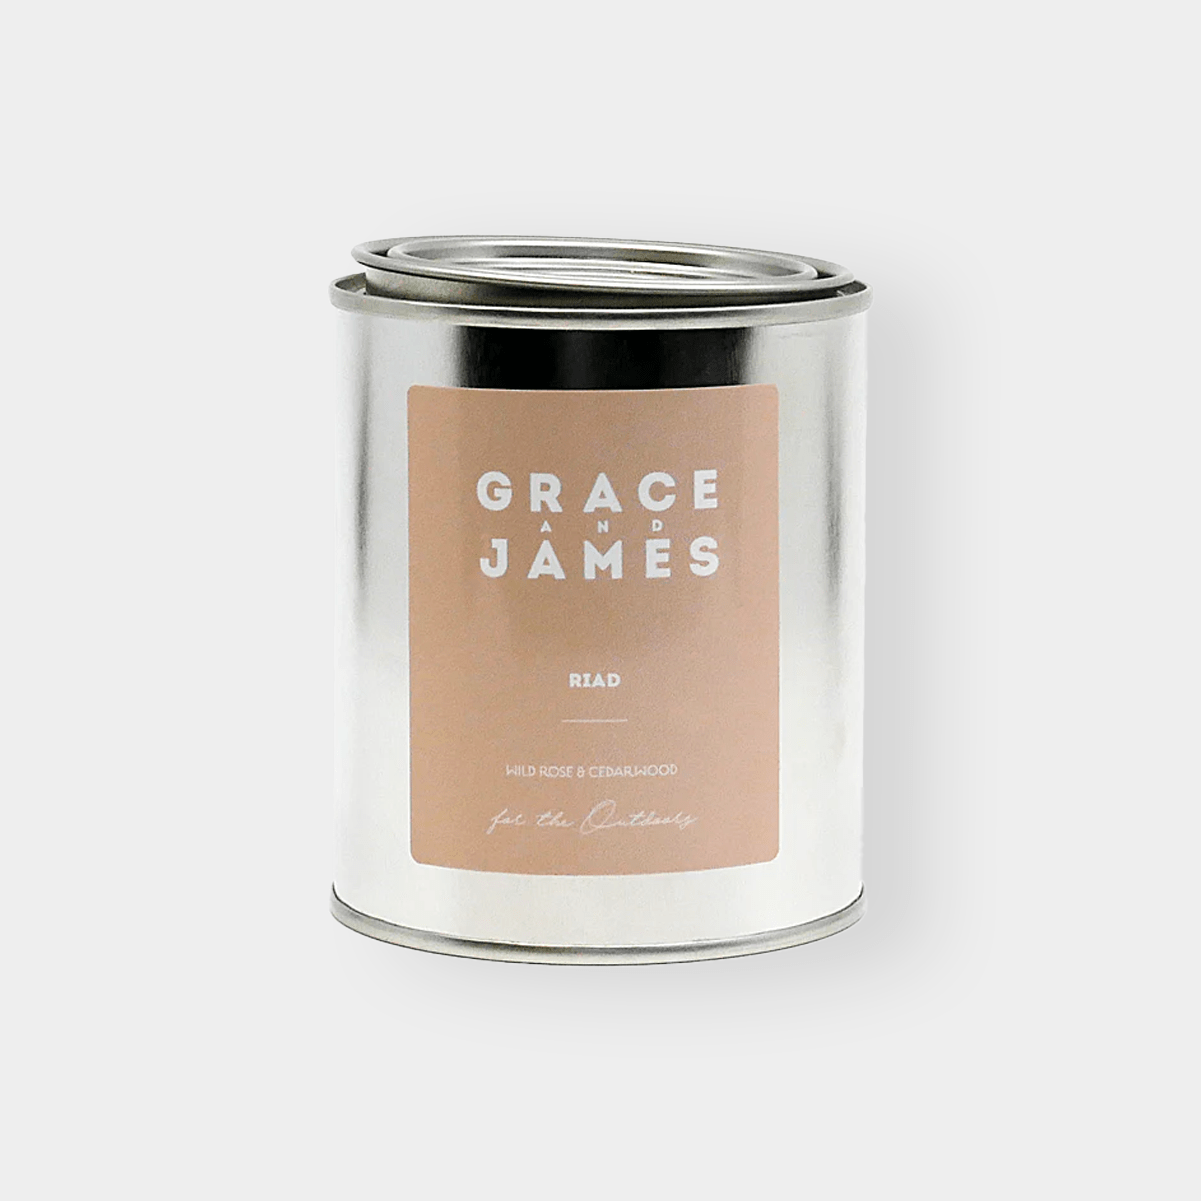 Grace and James Candles Grace and James For The Outdoors - Riad Candle (7762599051513)